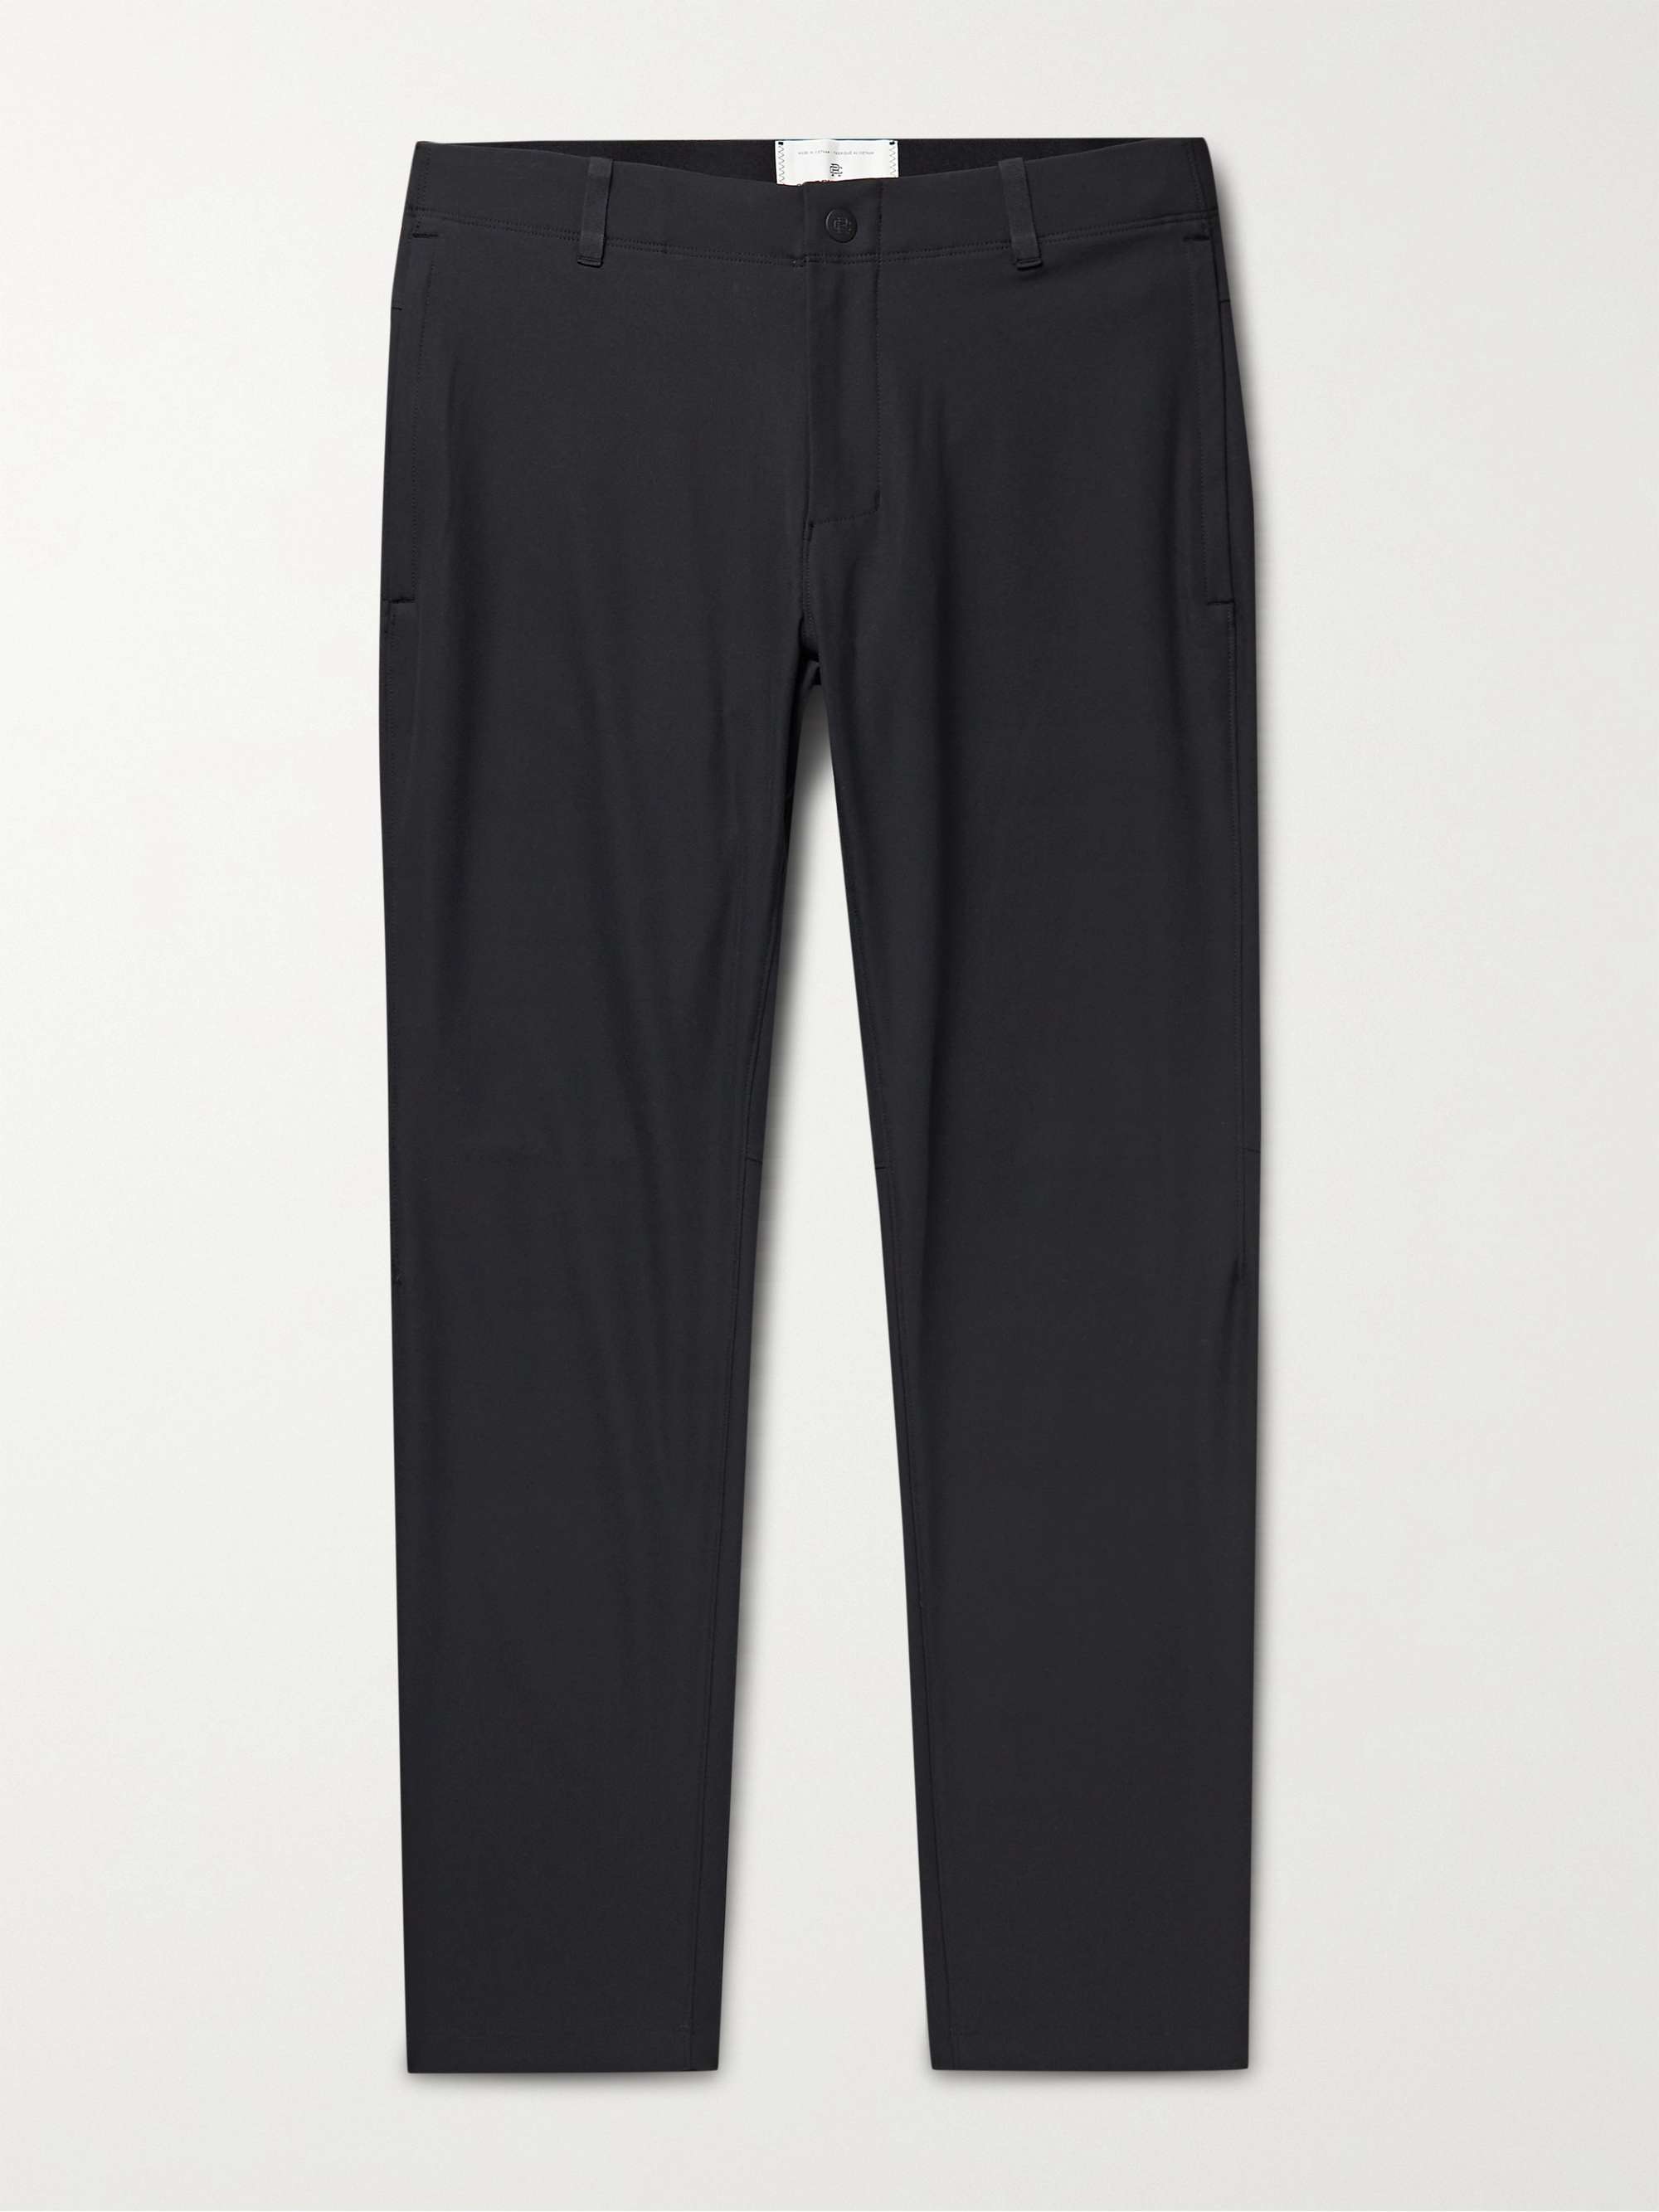 REIGNING CHAMP Coach's Tapered Primeflex Trousers